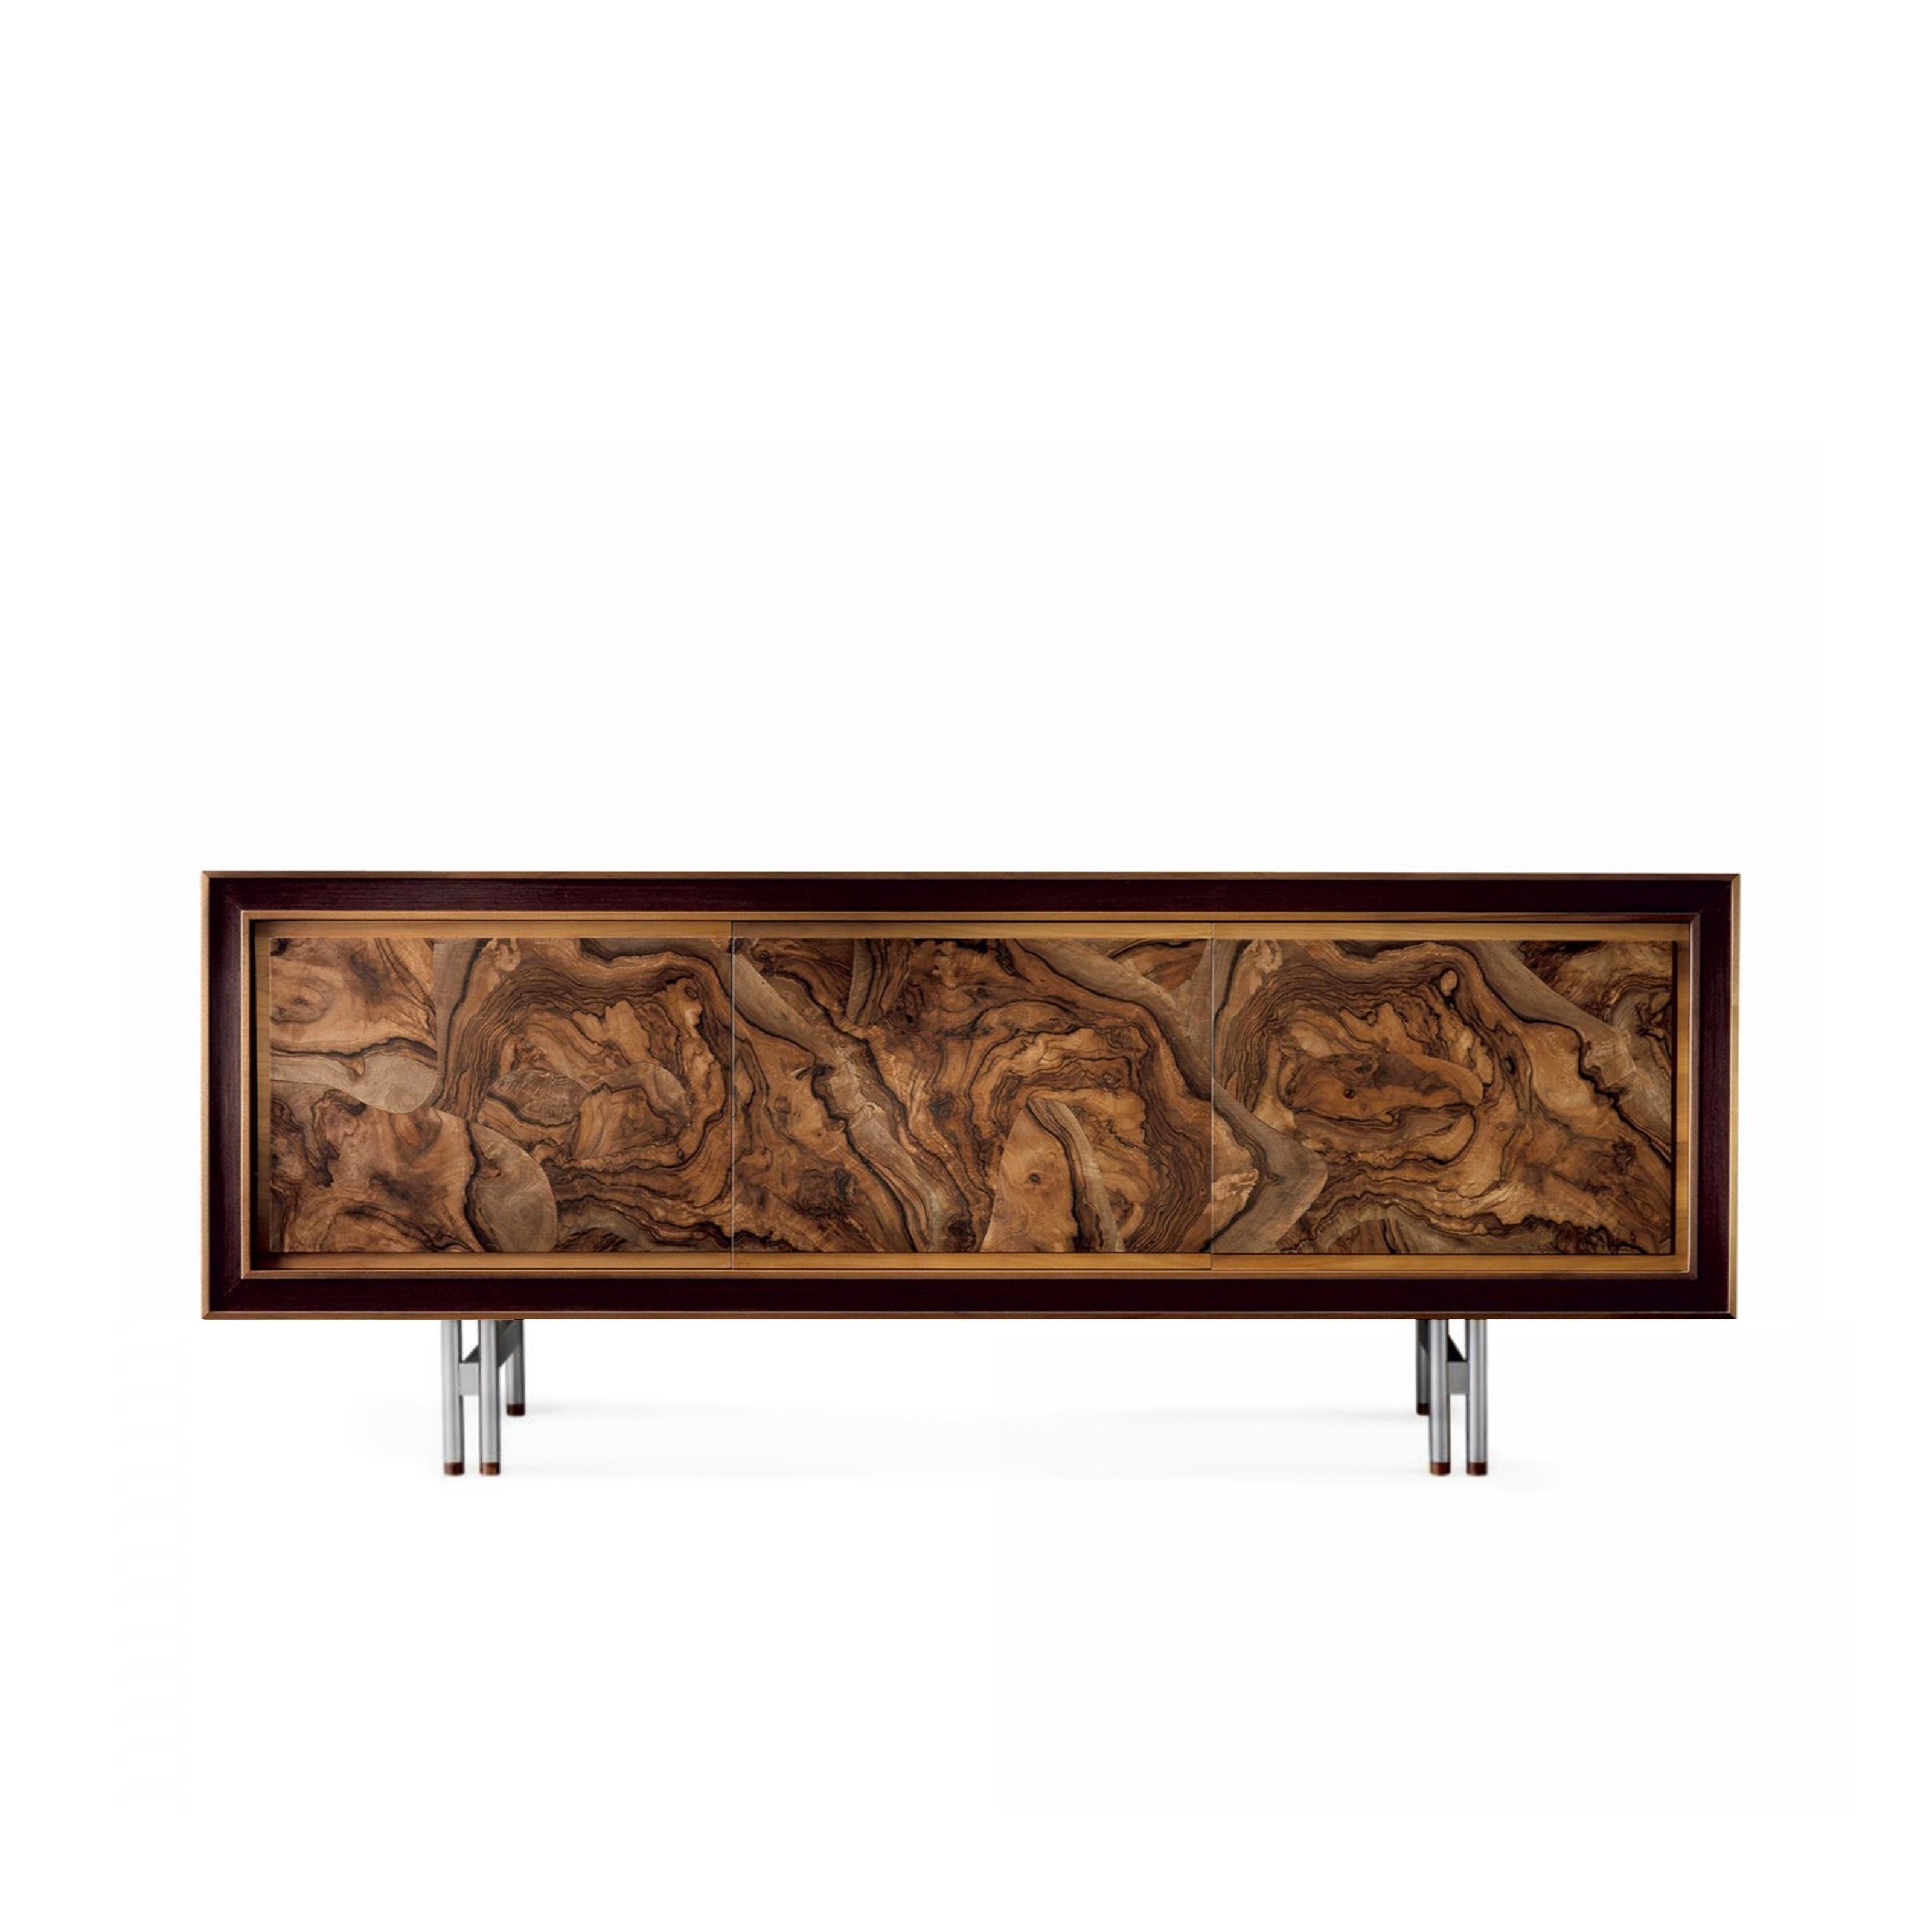 Copper Quadra Solid Wood Sideboard, Walnut, Briar in Natural Finish, Contemporary For Sale